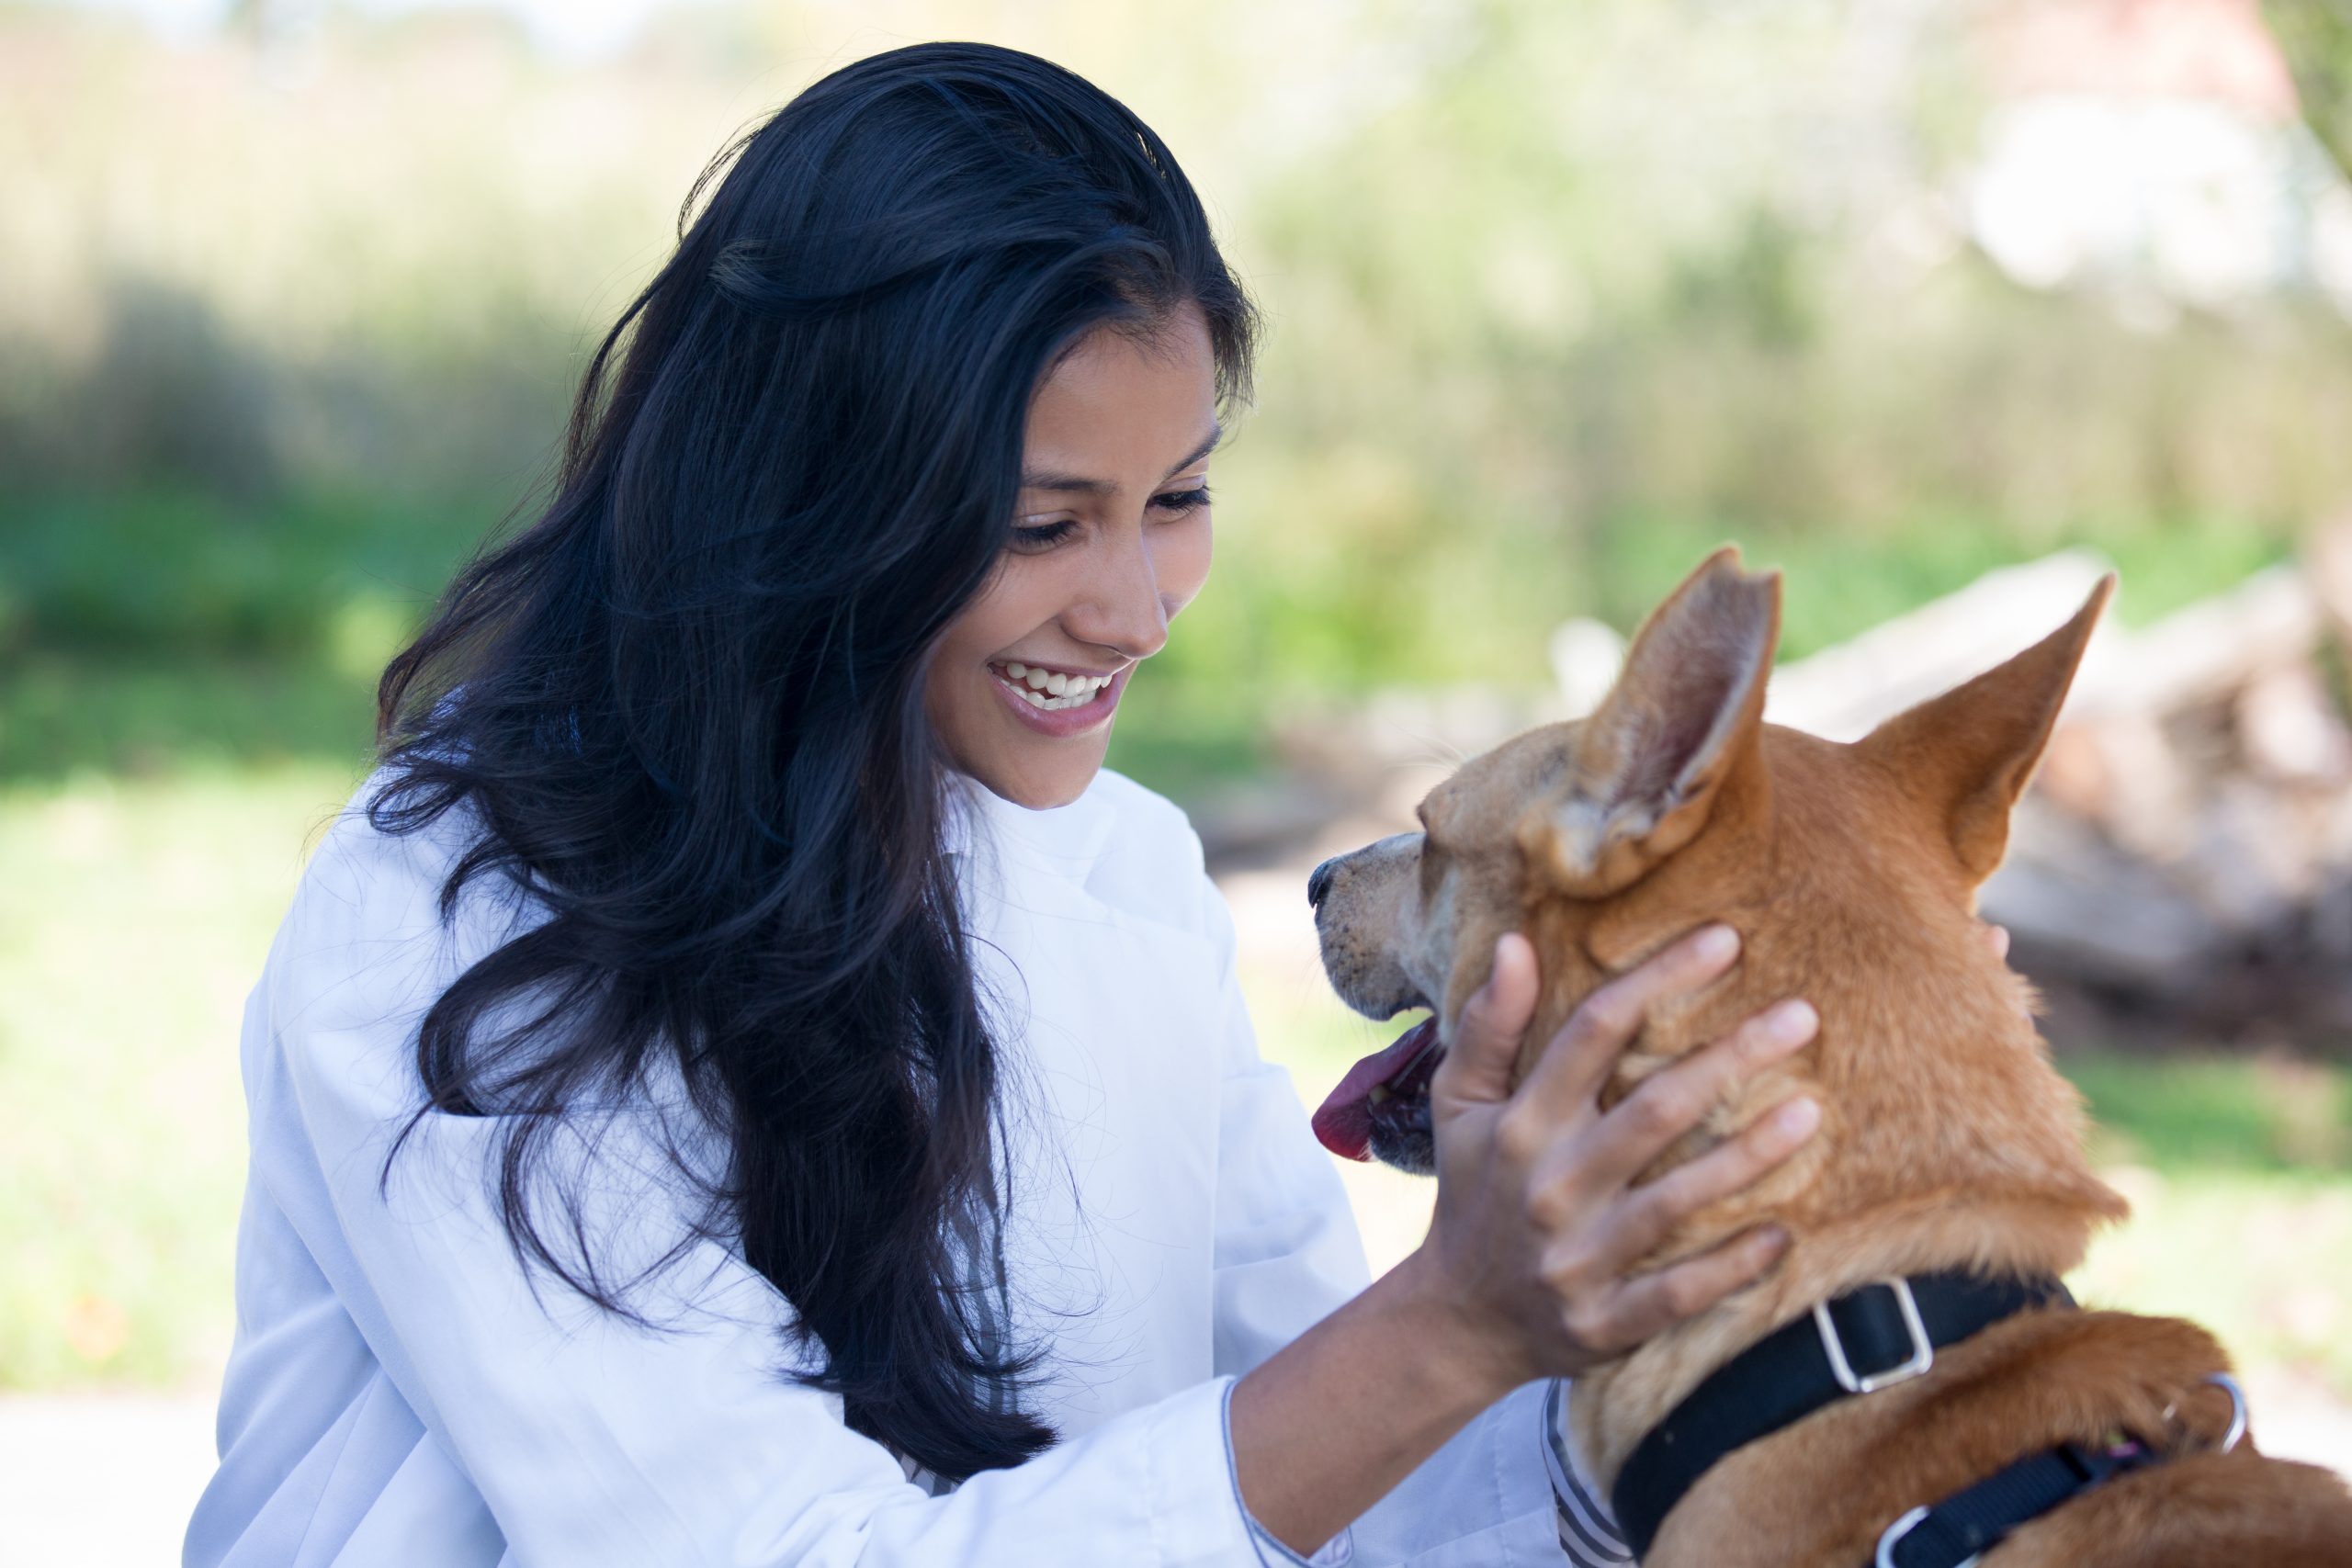 What is the Best Degree for Becoming an Animal Care Worker?